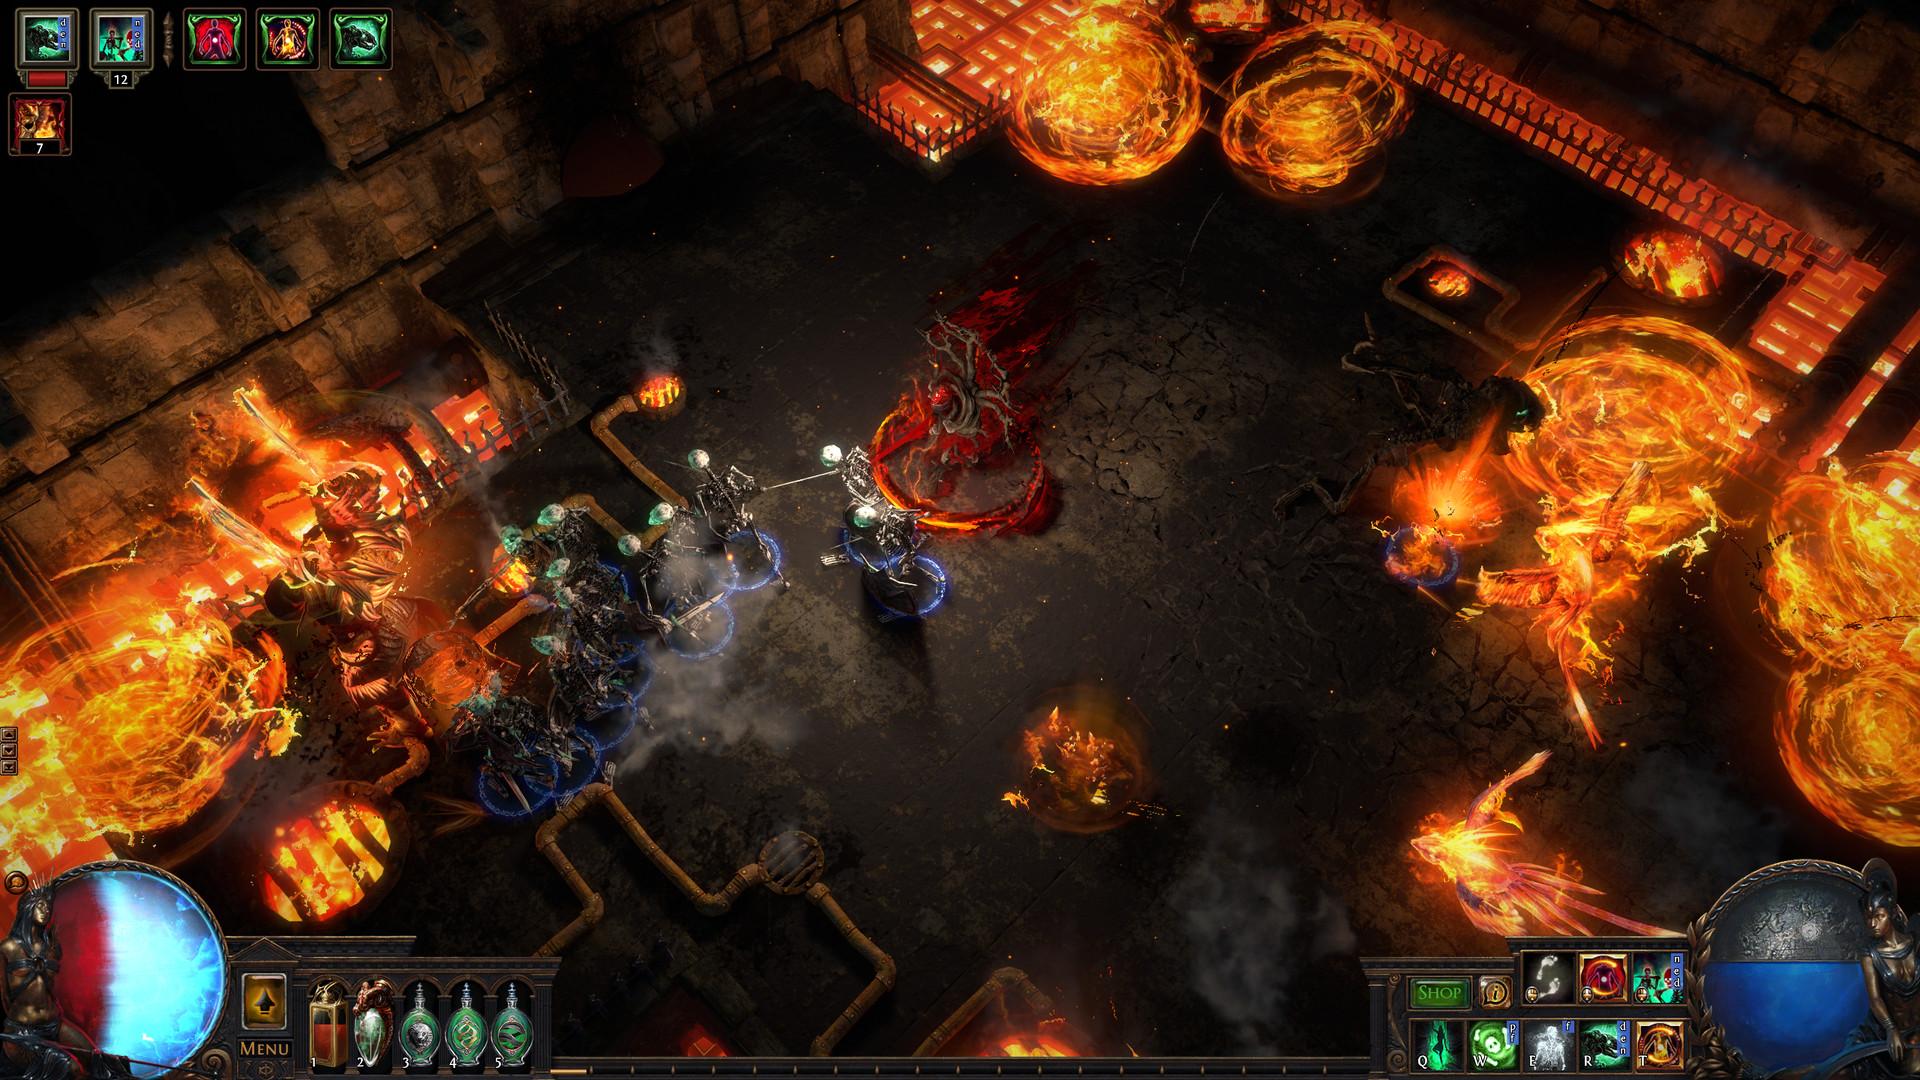 Screenshot №53 from game Path of Exile